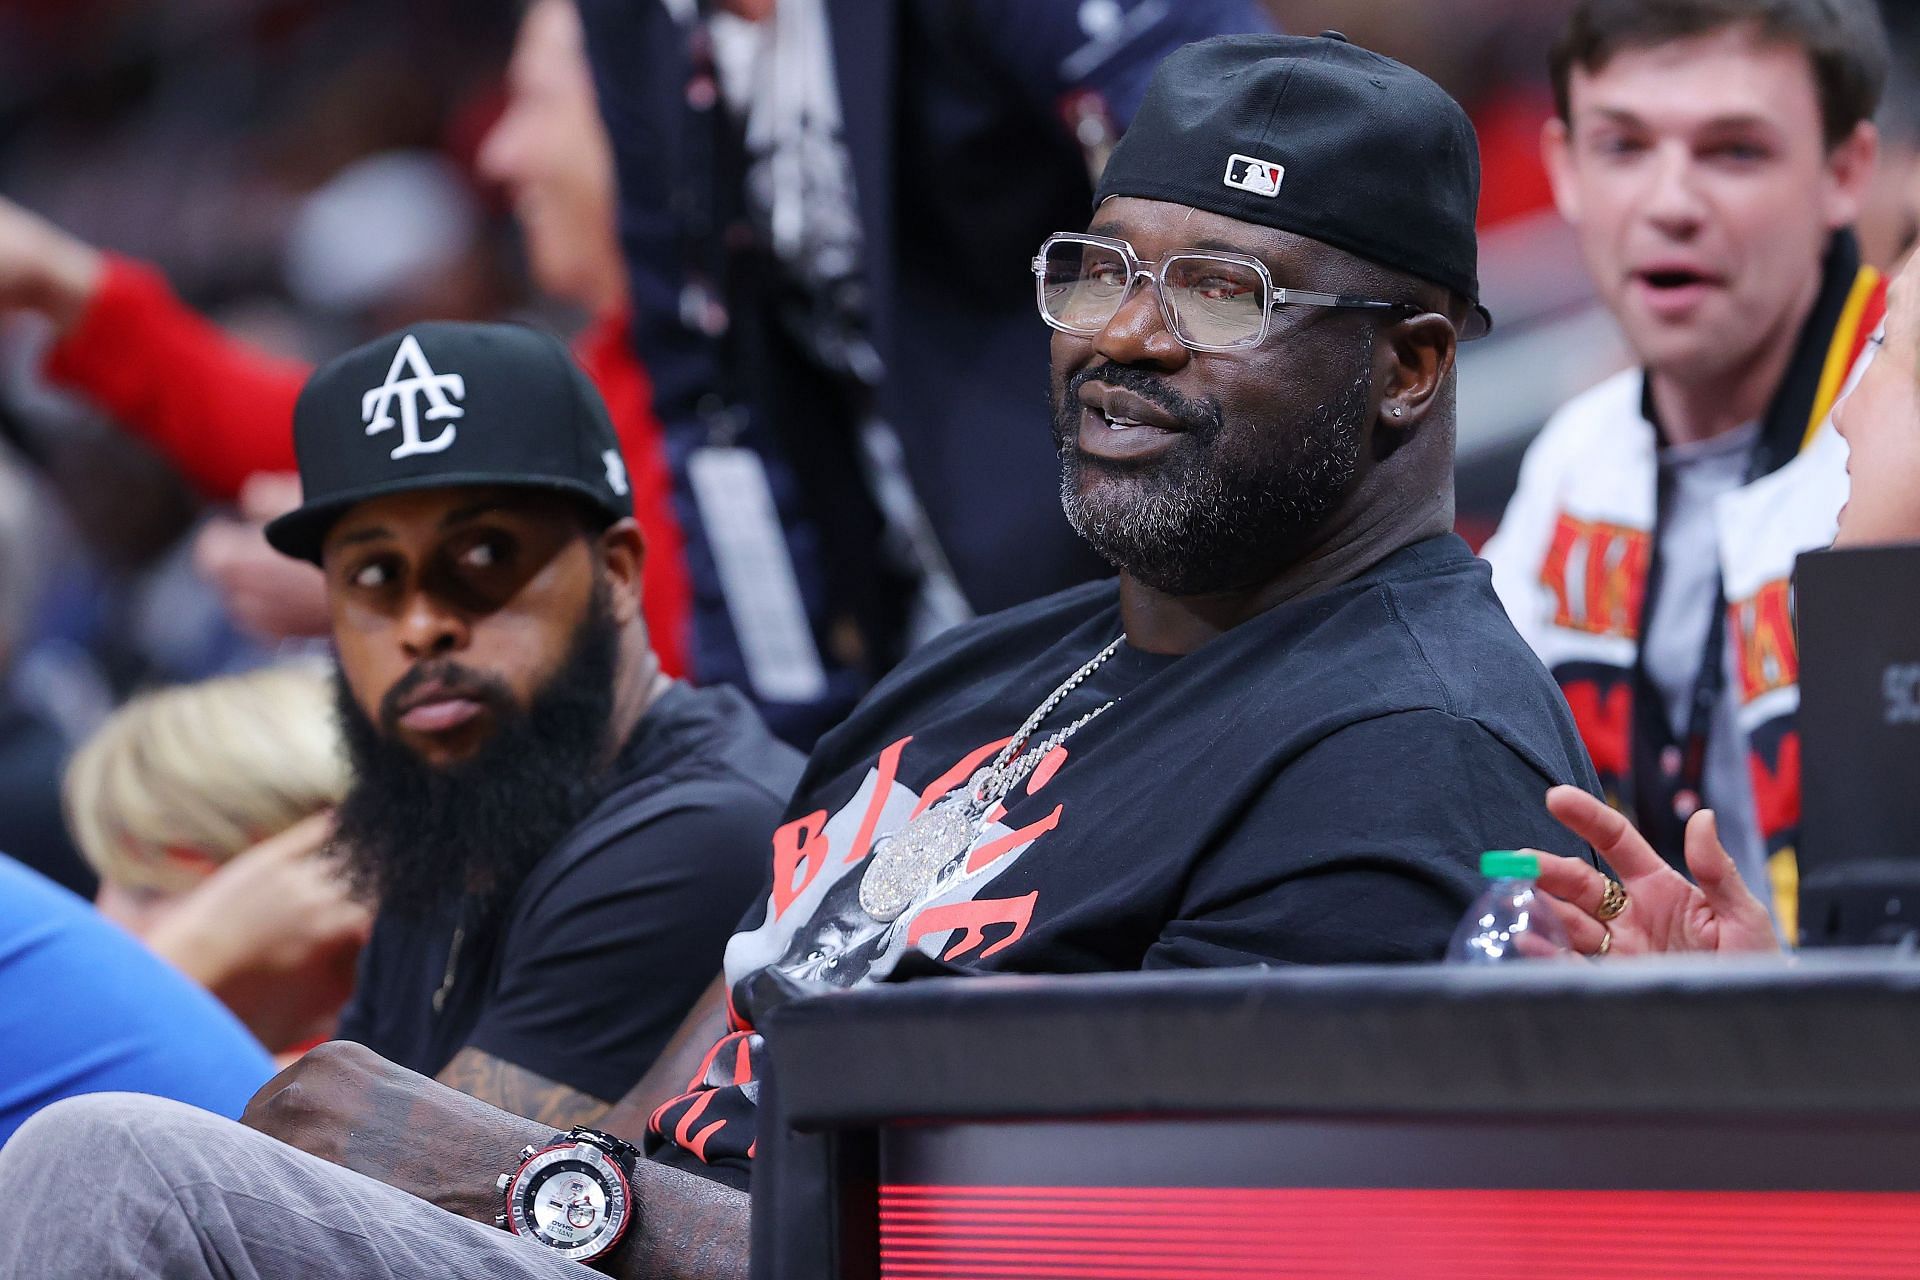 Shaq has become one of the top merchandisers globally and Snoop Dogg wants to do the same.